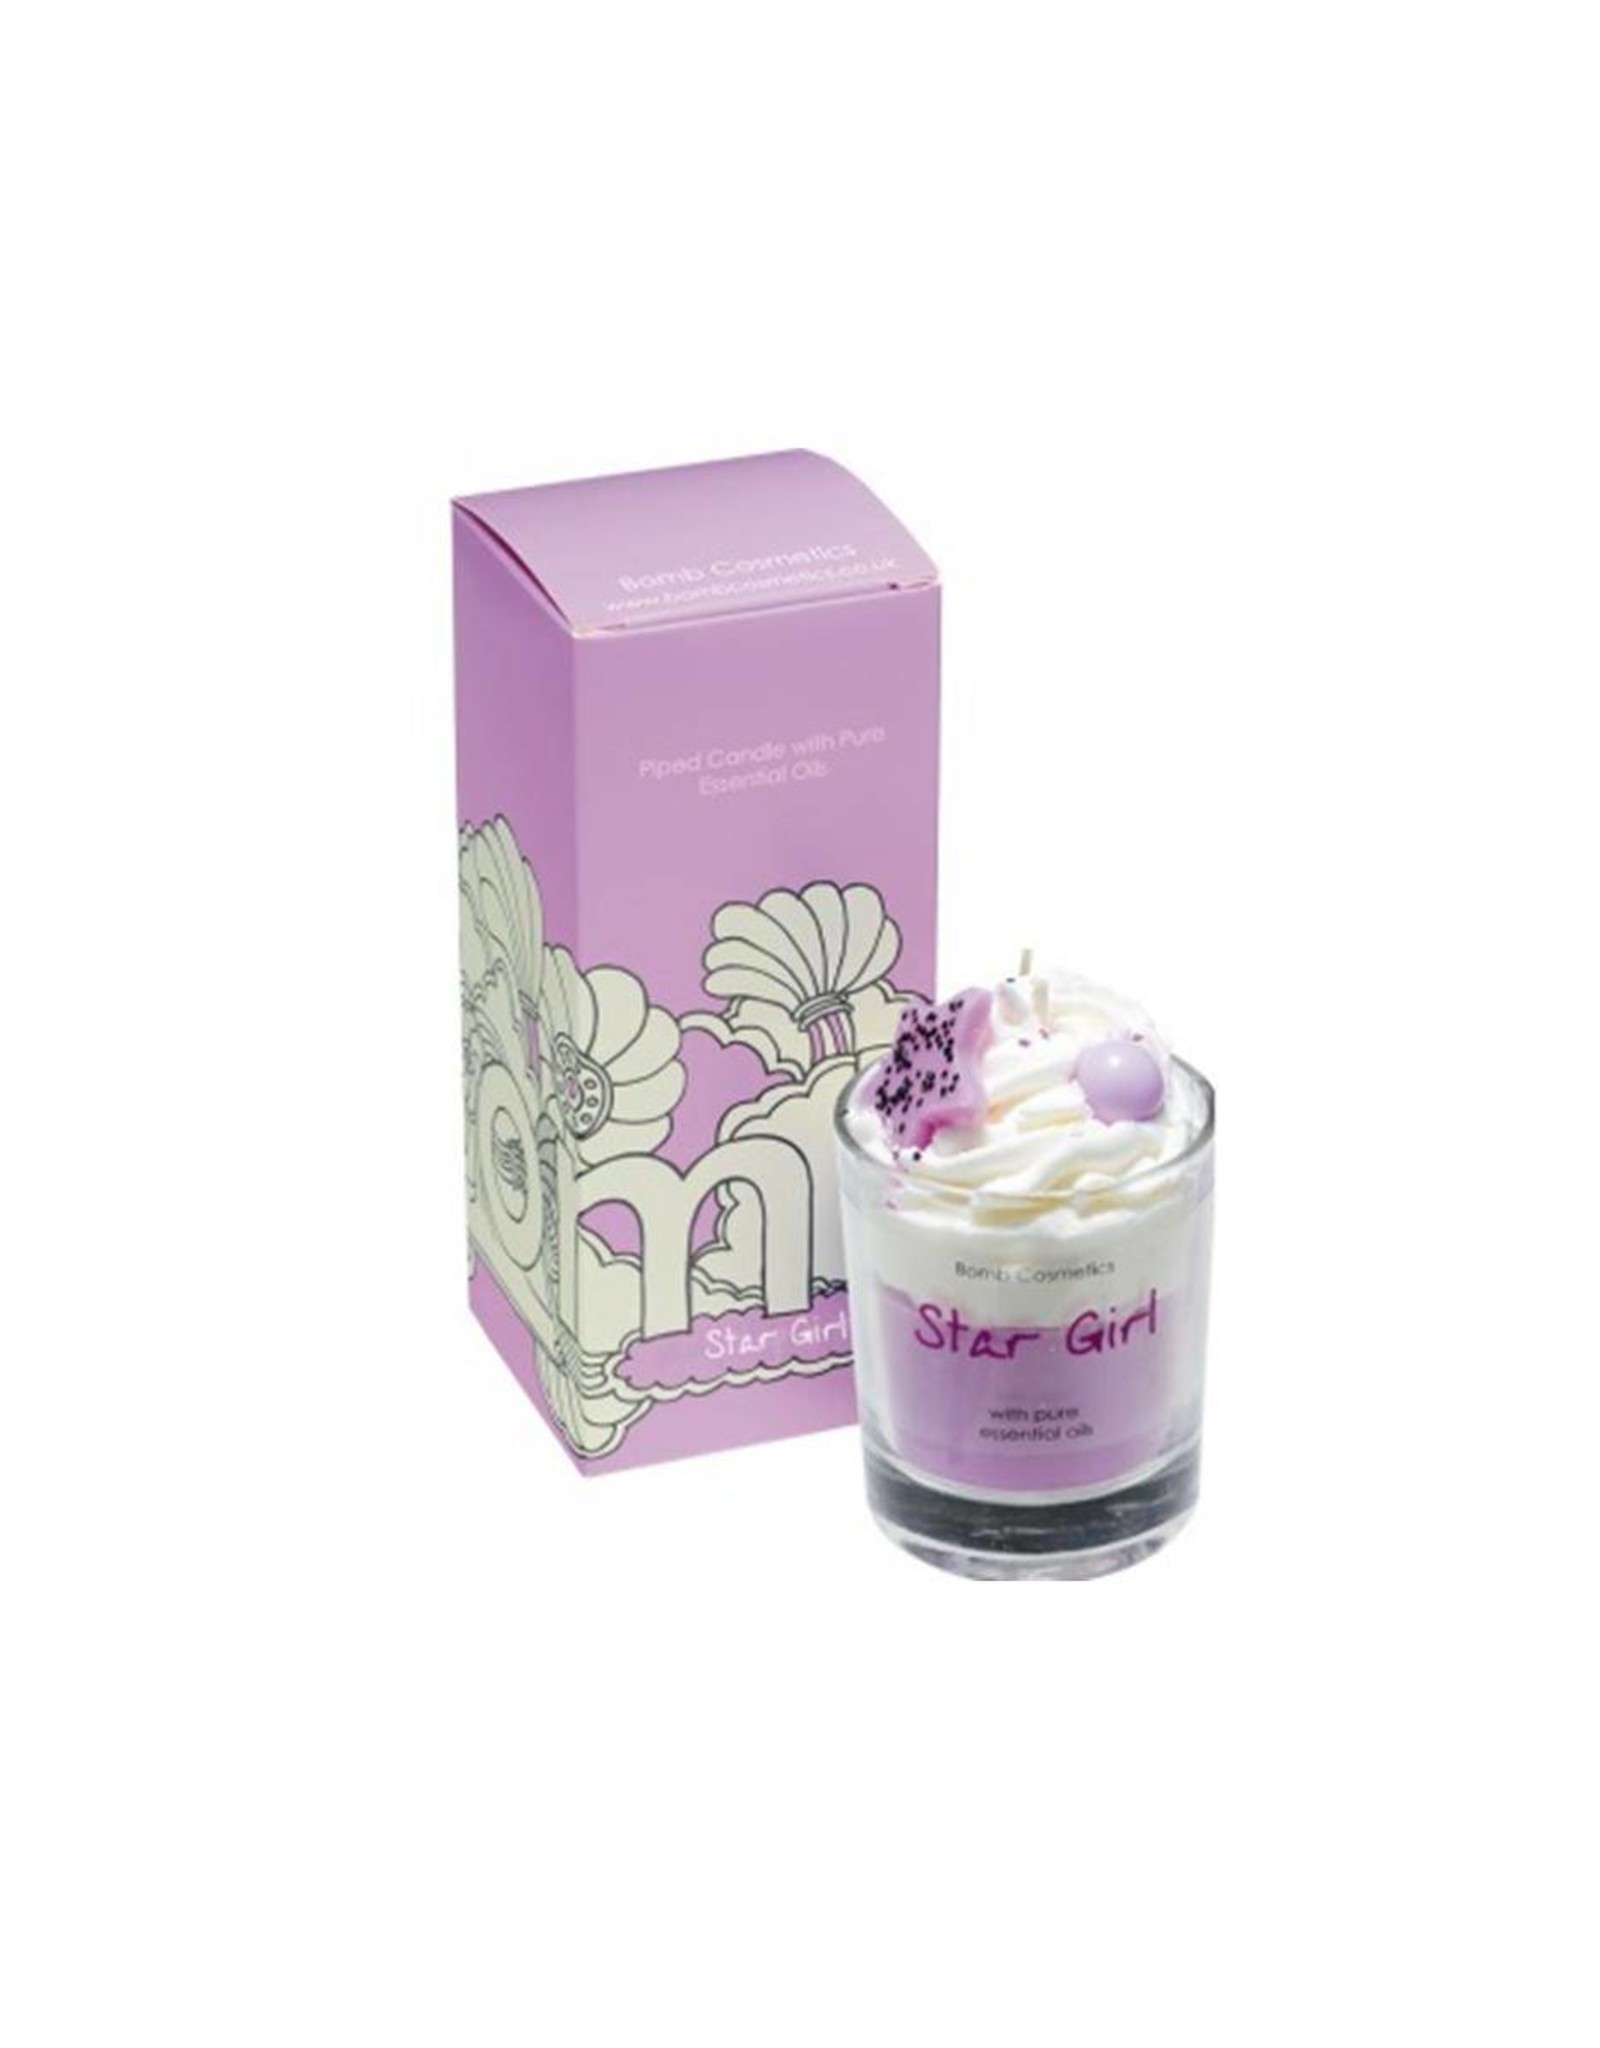 Bomb Cosmetics Geurkaars 'Star Girl Whipped Piped Candle' - Body & Soap